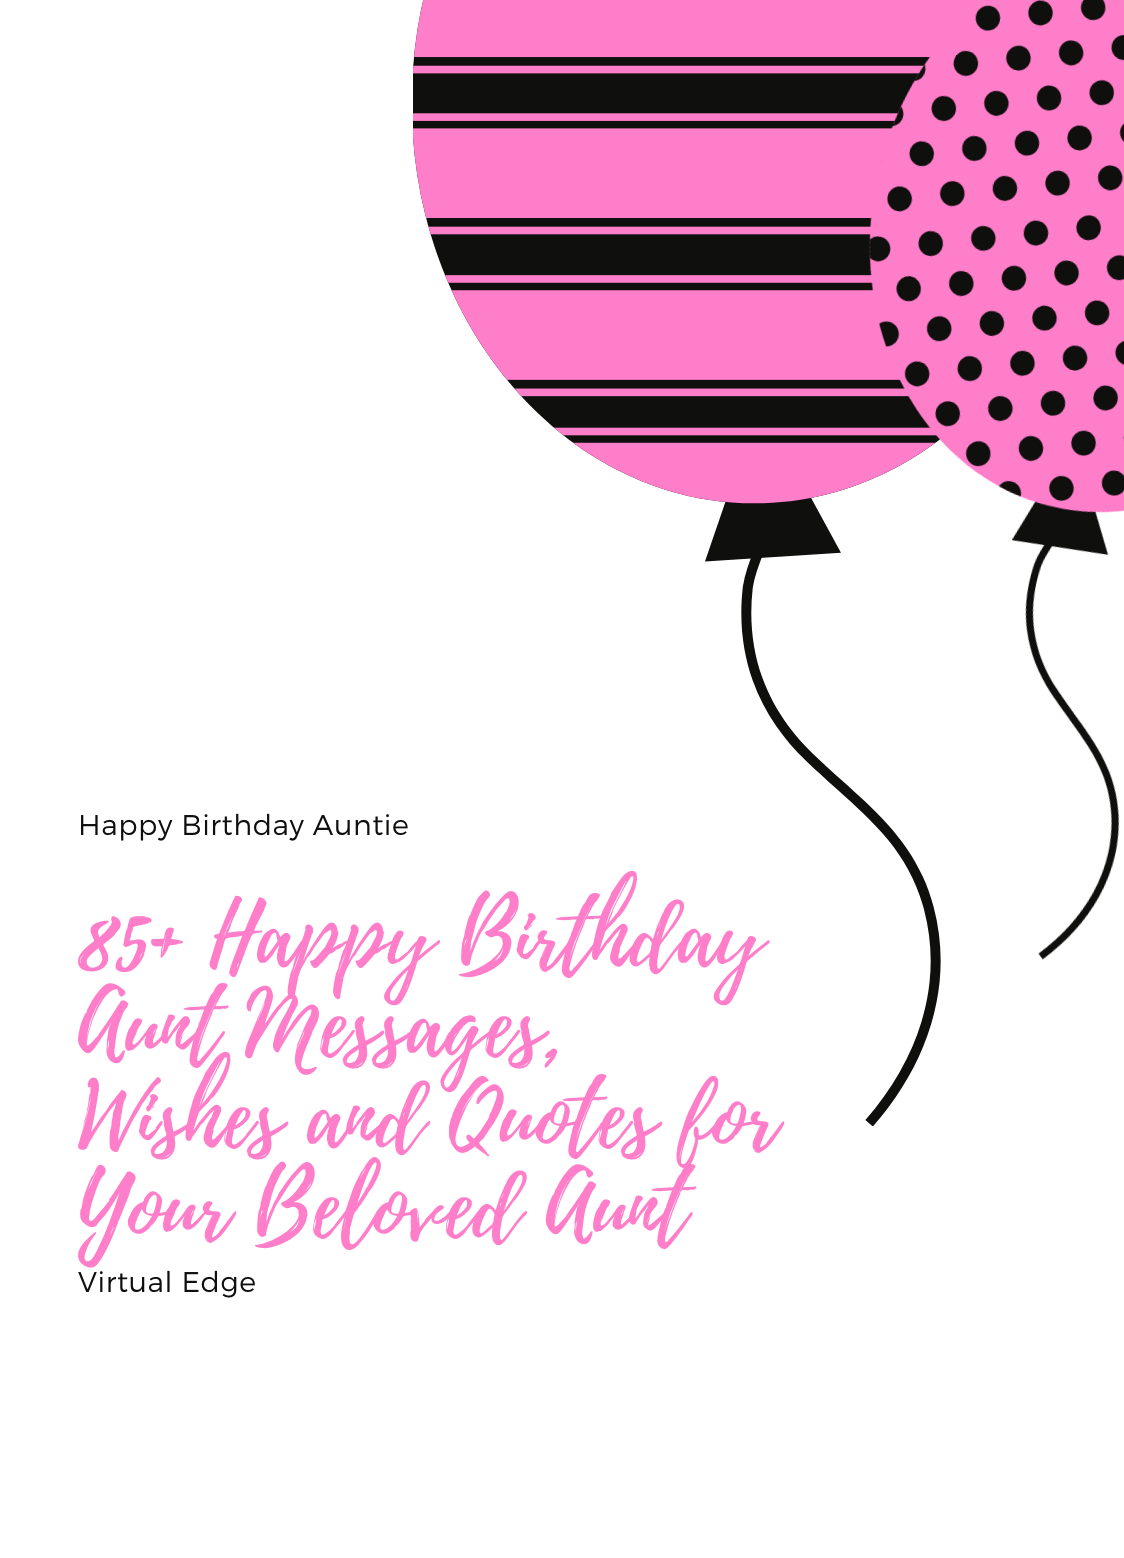 85+ Happy Birthday Aunt Messages, Wishes and Quotes for Your Beloved Aunt